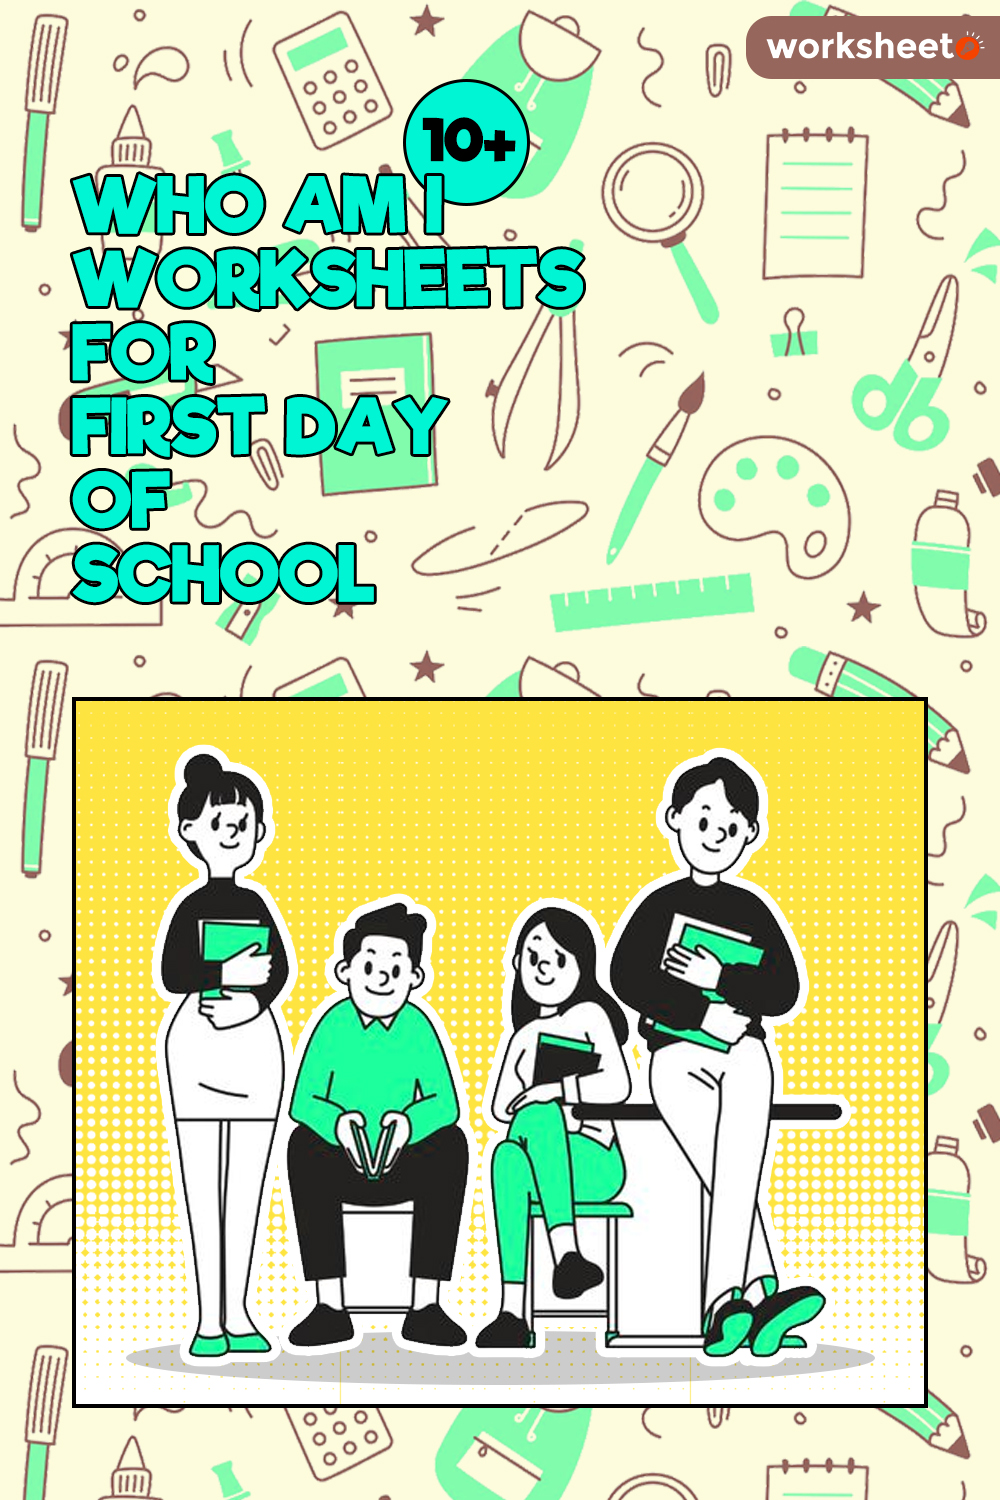 13 Images of Who AM I Worksheets For First Day Of School